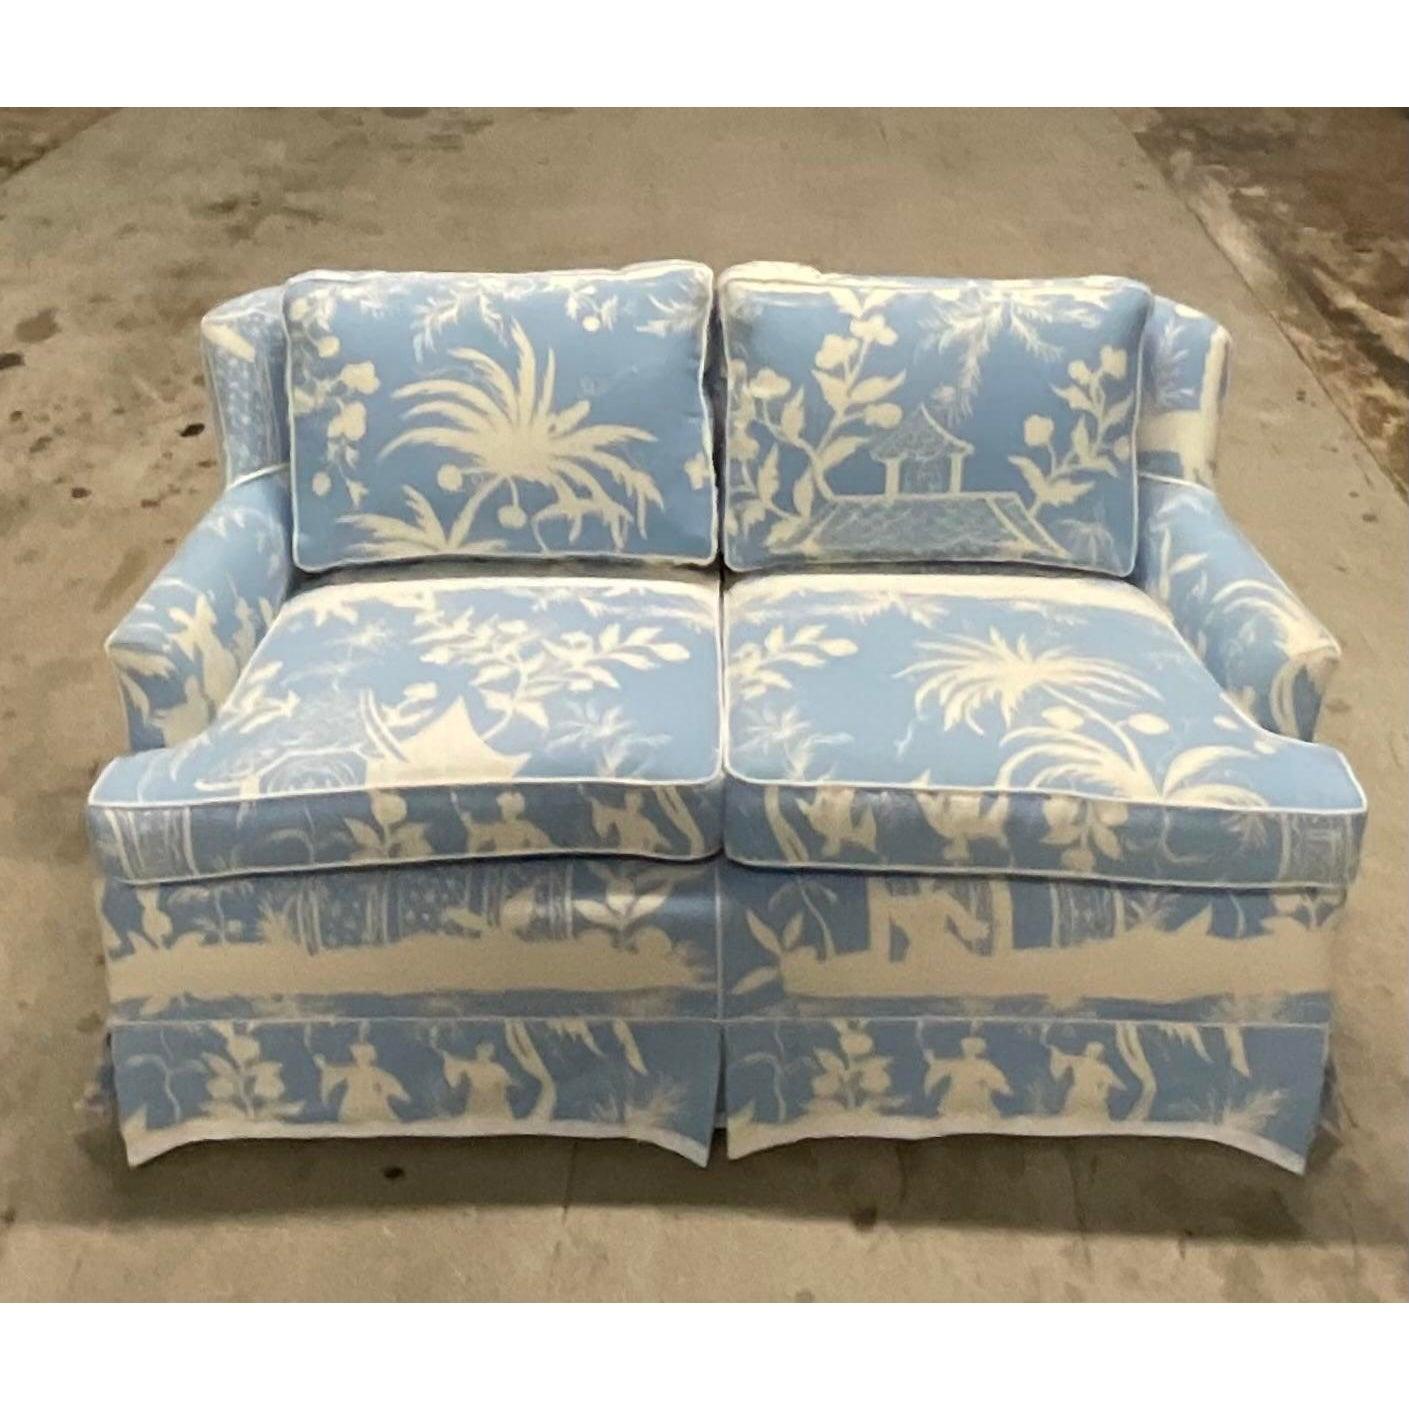 Fantastic vintage custom built loveseat. Beautiful high back shape done in Quadrille “China Seas” in custom pale ice lavender. The most stunning chinoiserie design. Acquired from a Palm Beach estate.